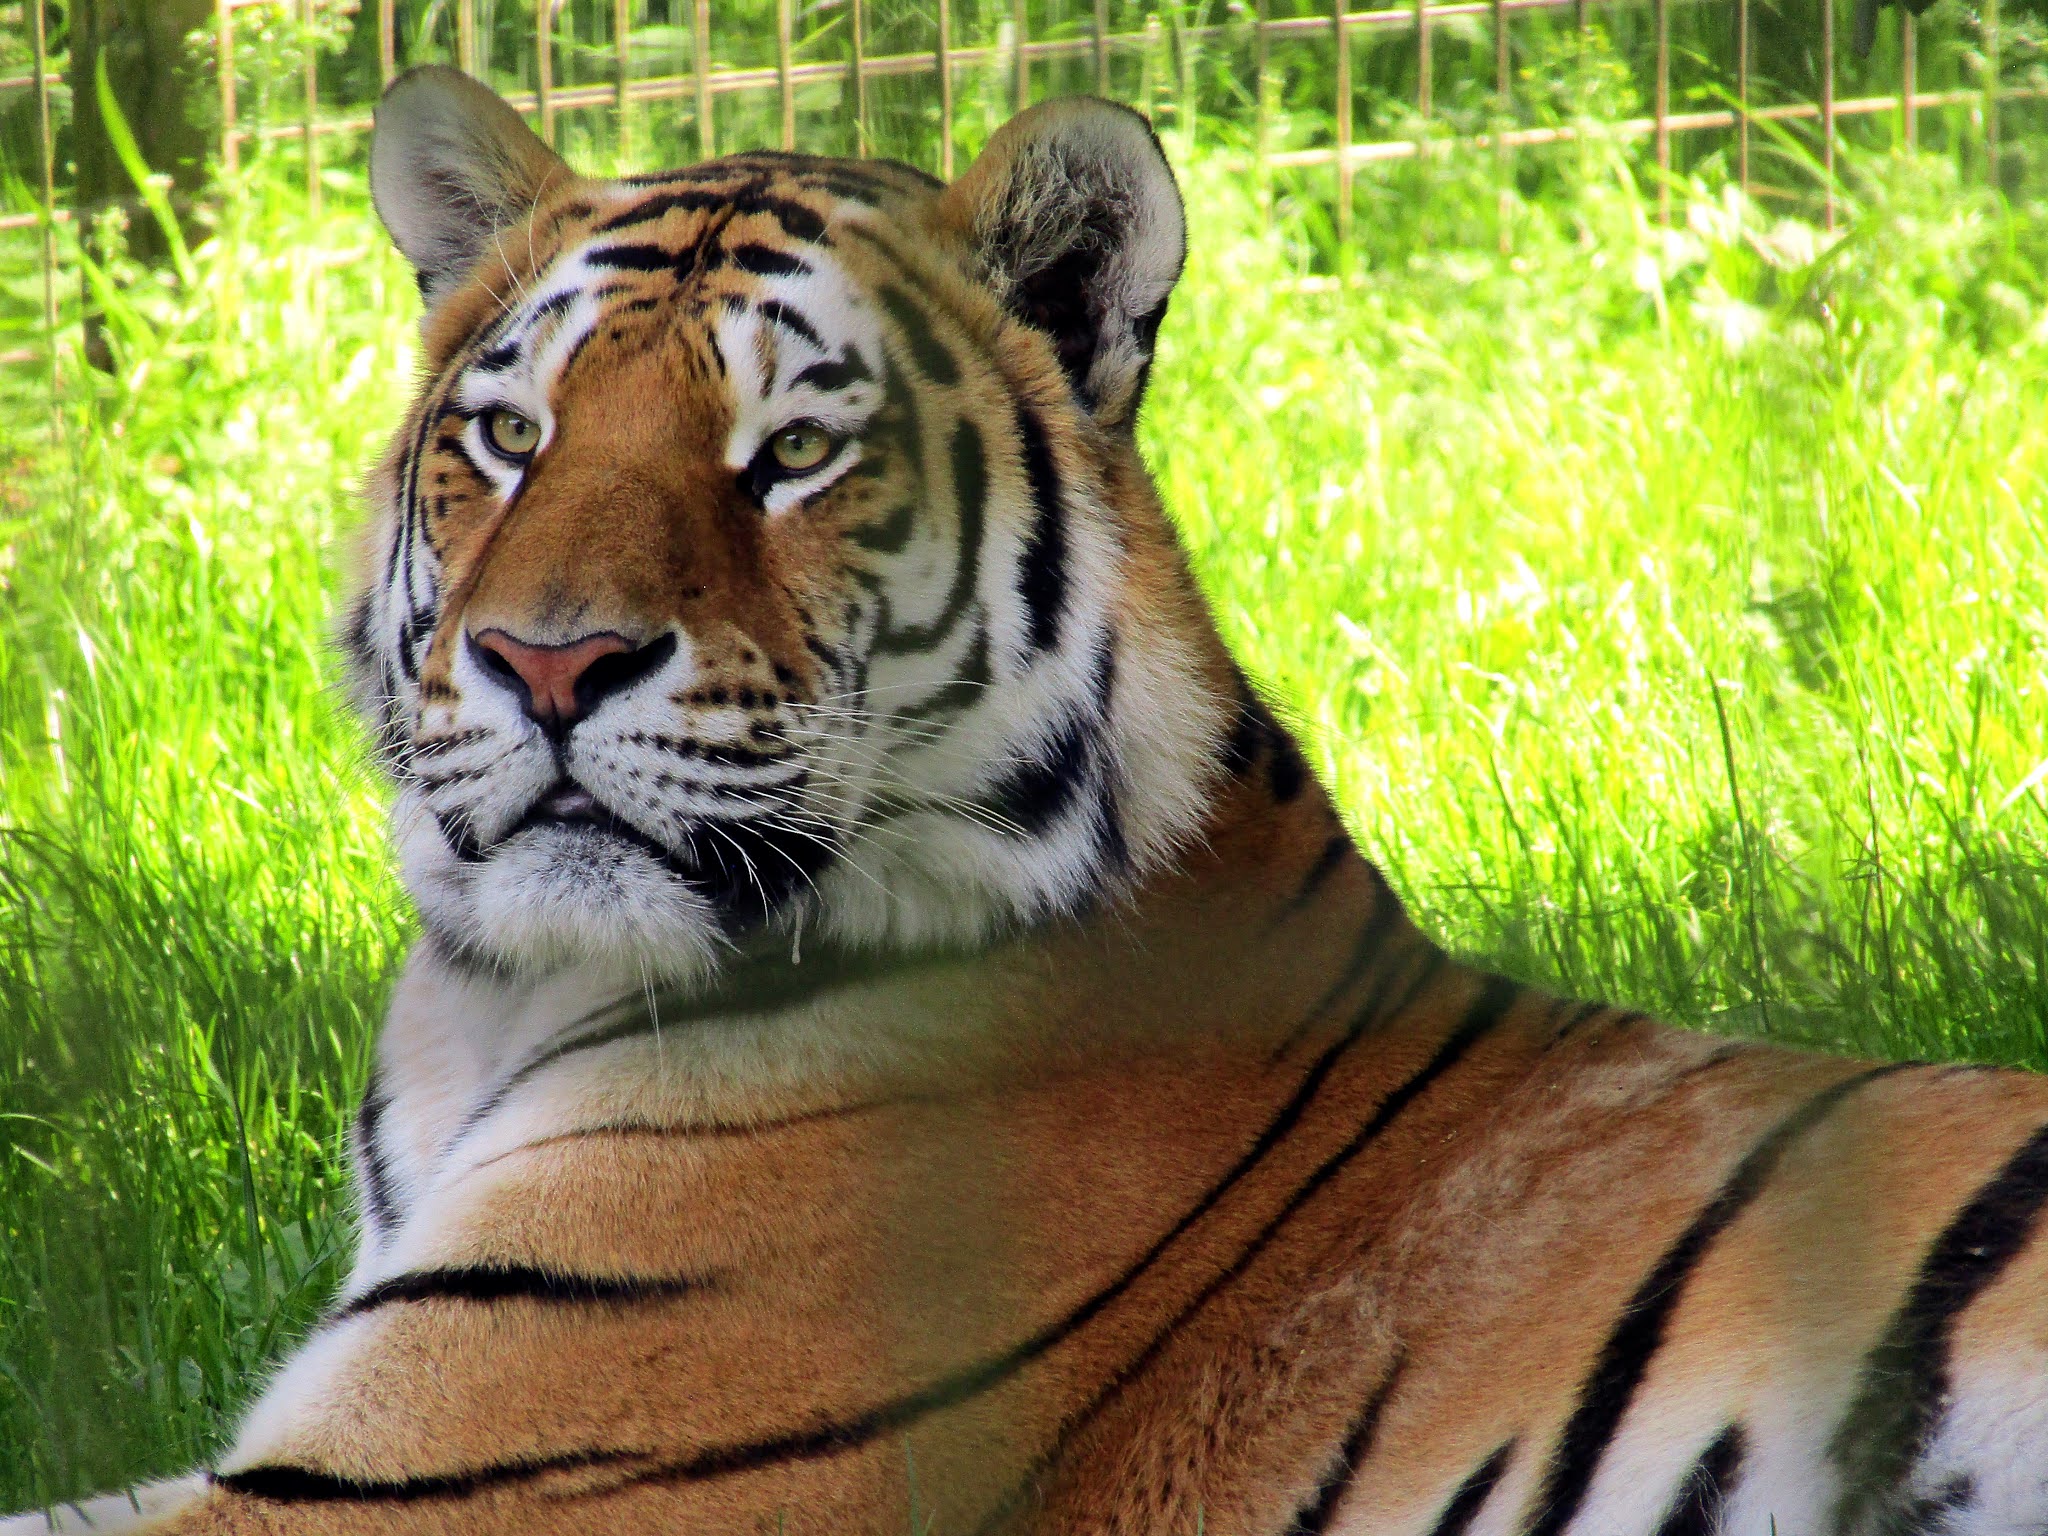 A photo of an Amur tiger at Whipsnade Zoo.